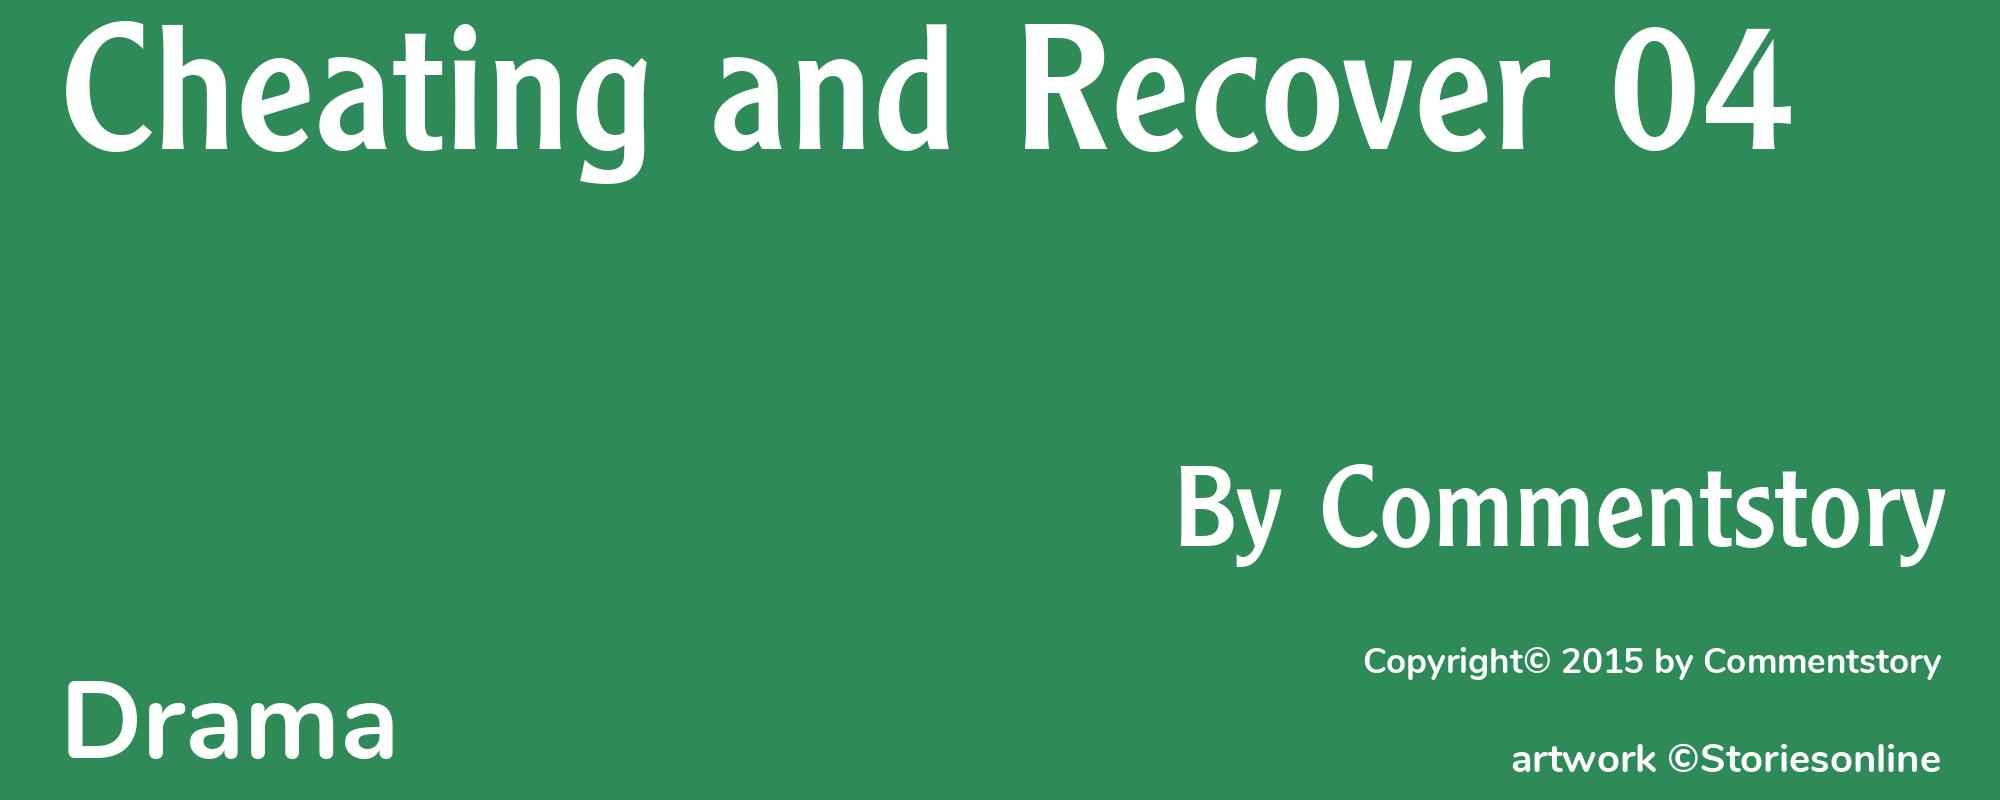 Cheating and Recover 04 - Cover